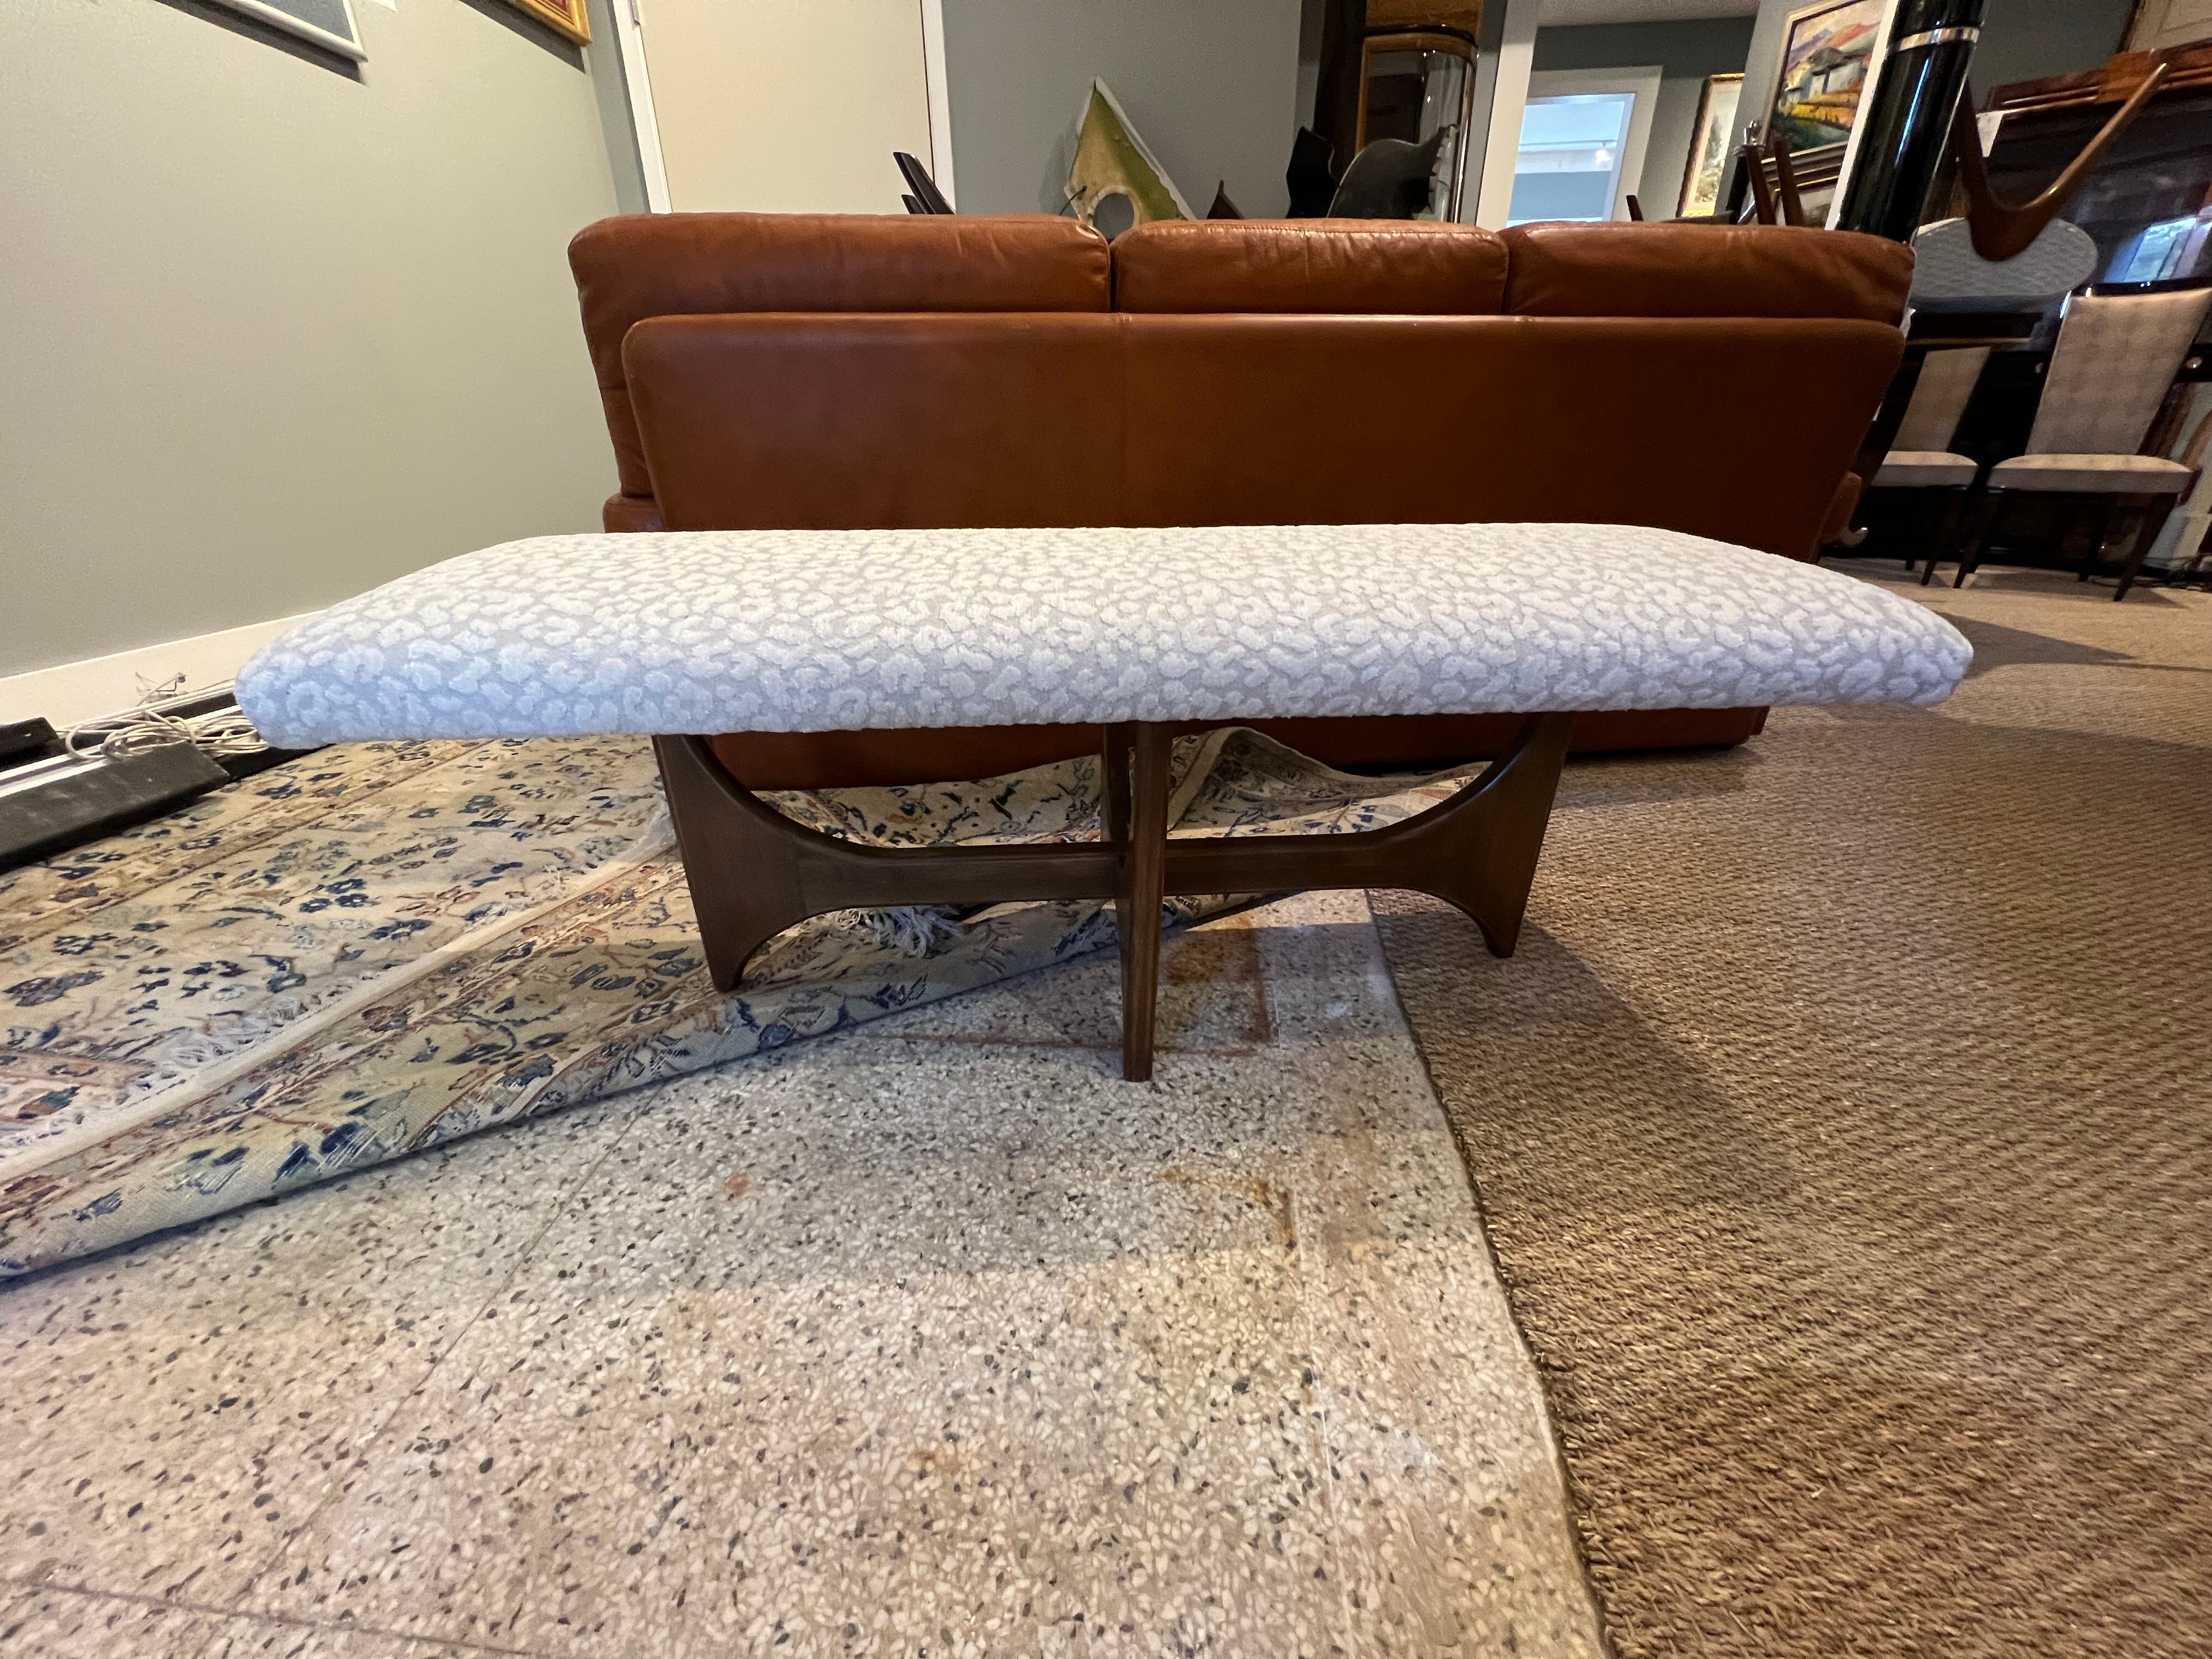 Mid-century Bench is made out of beech wood. Newly re-upholstered in a light velvety fabric and re-polished. Legs are beautifully carved and intertwine on the bottom.

Condition is perfect. Restored.
Italy, c. 1950s 
51